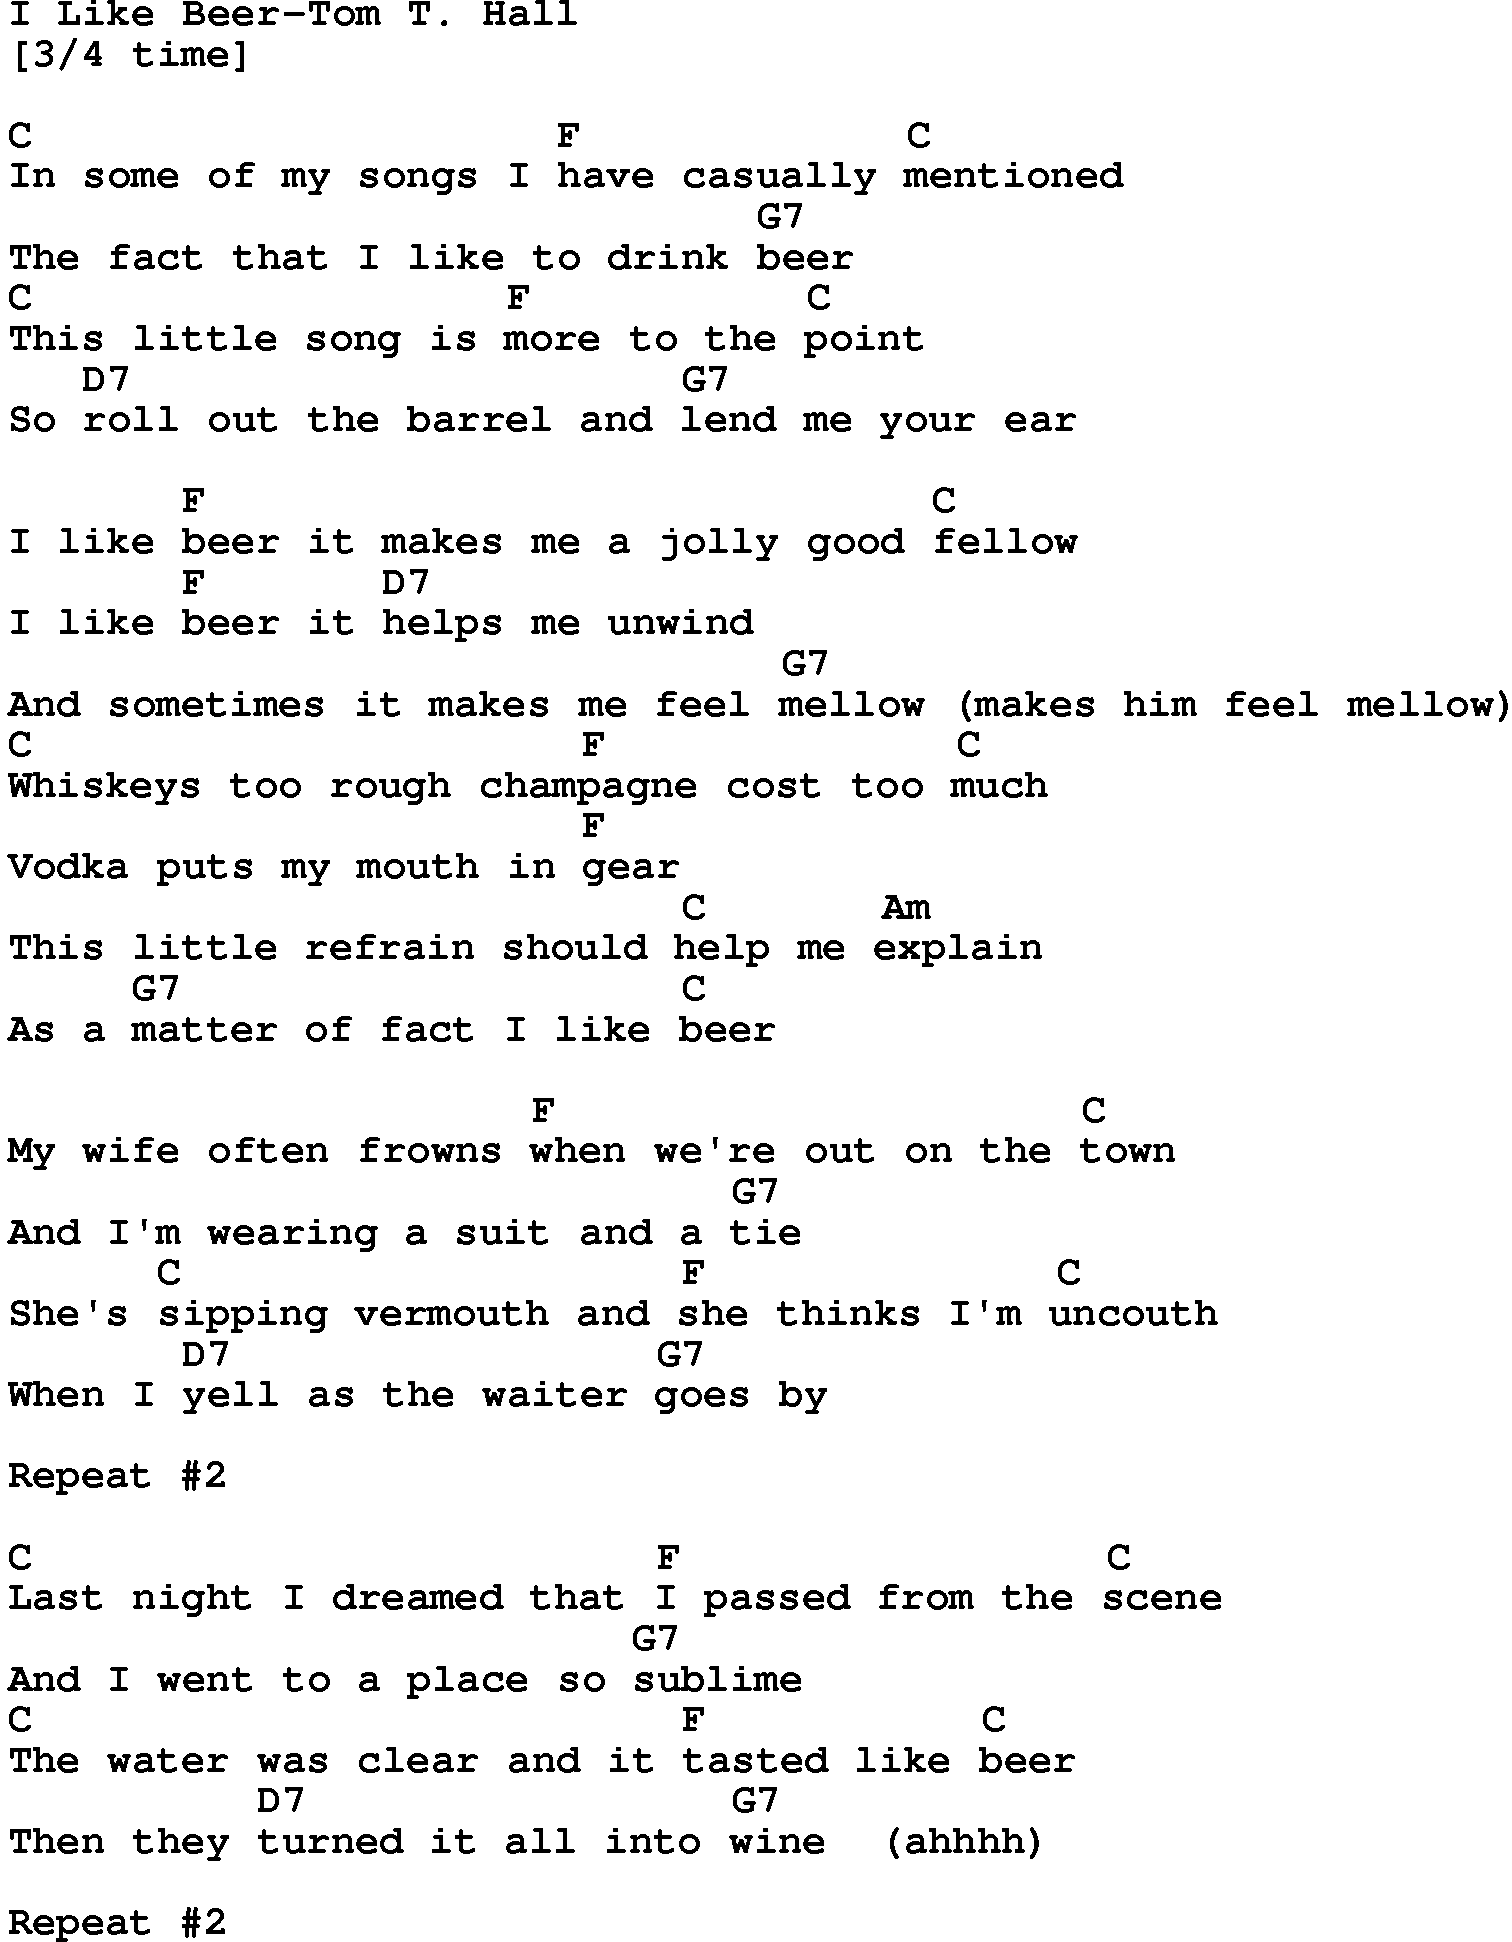 Country music song: I Like Beer-Tom T Hall lyrics and chords